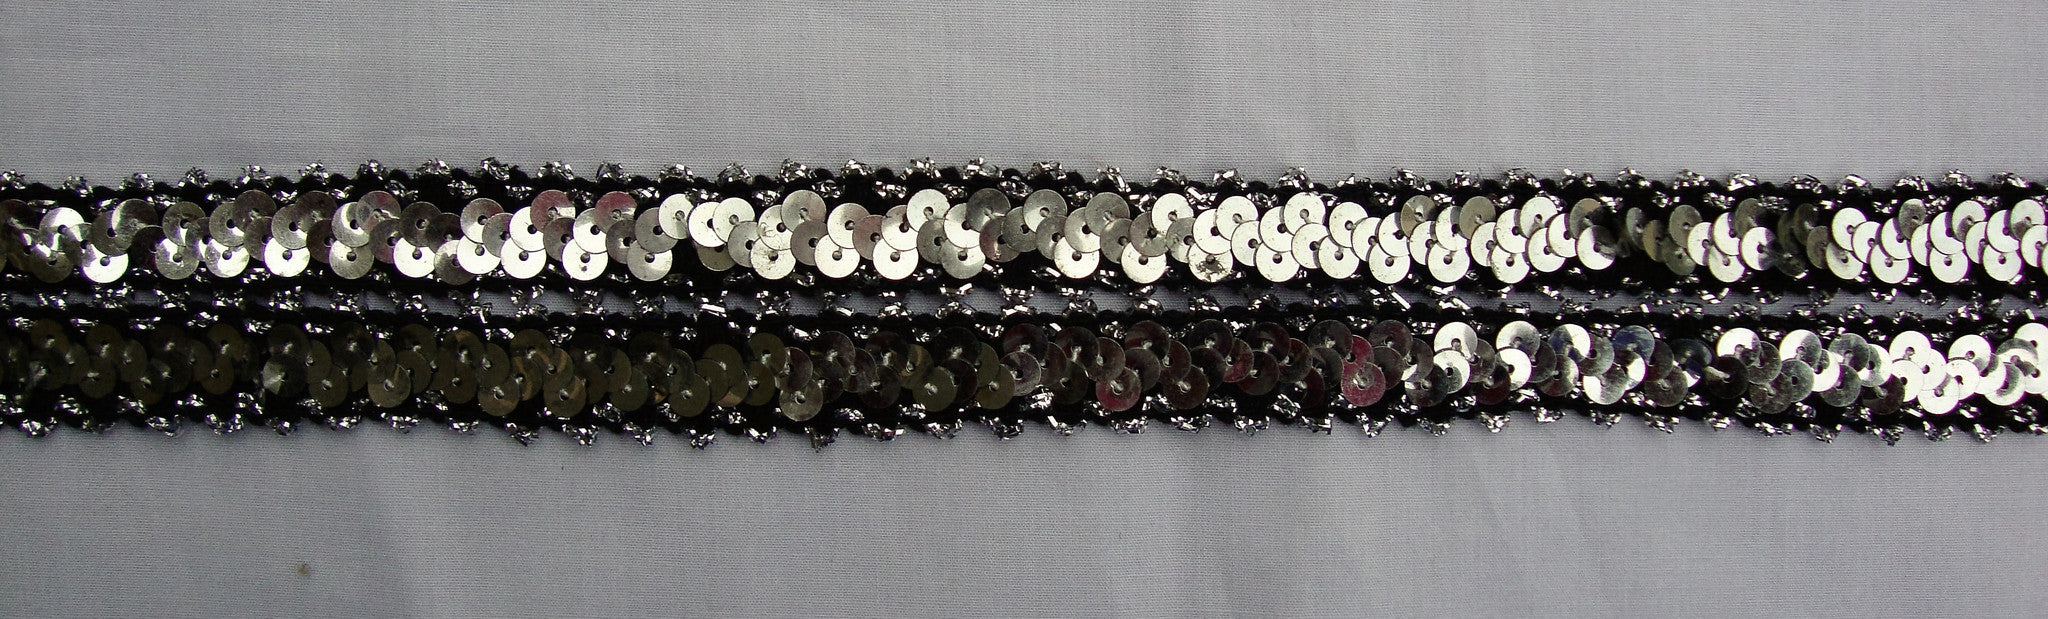 Silver Sequin Trimming (Sold as a 4 yard piece)